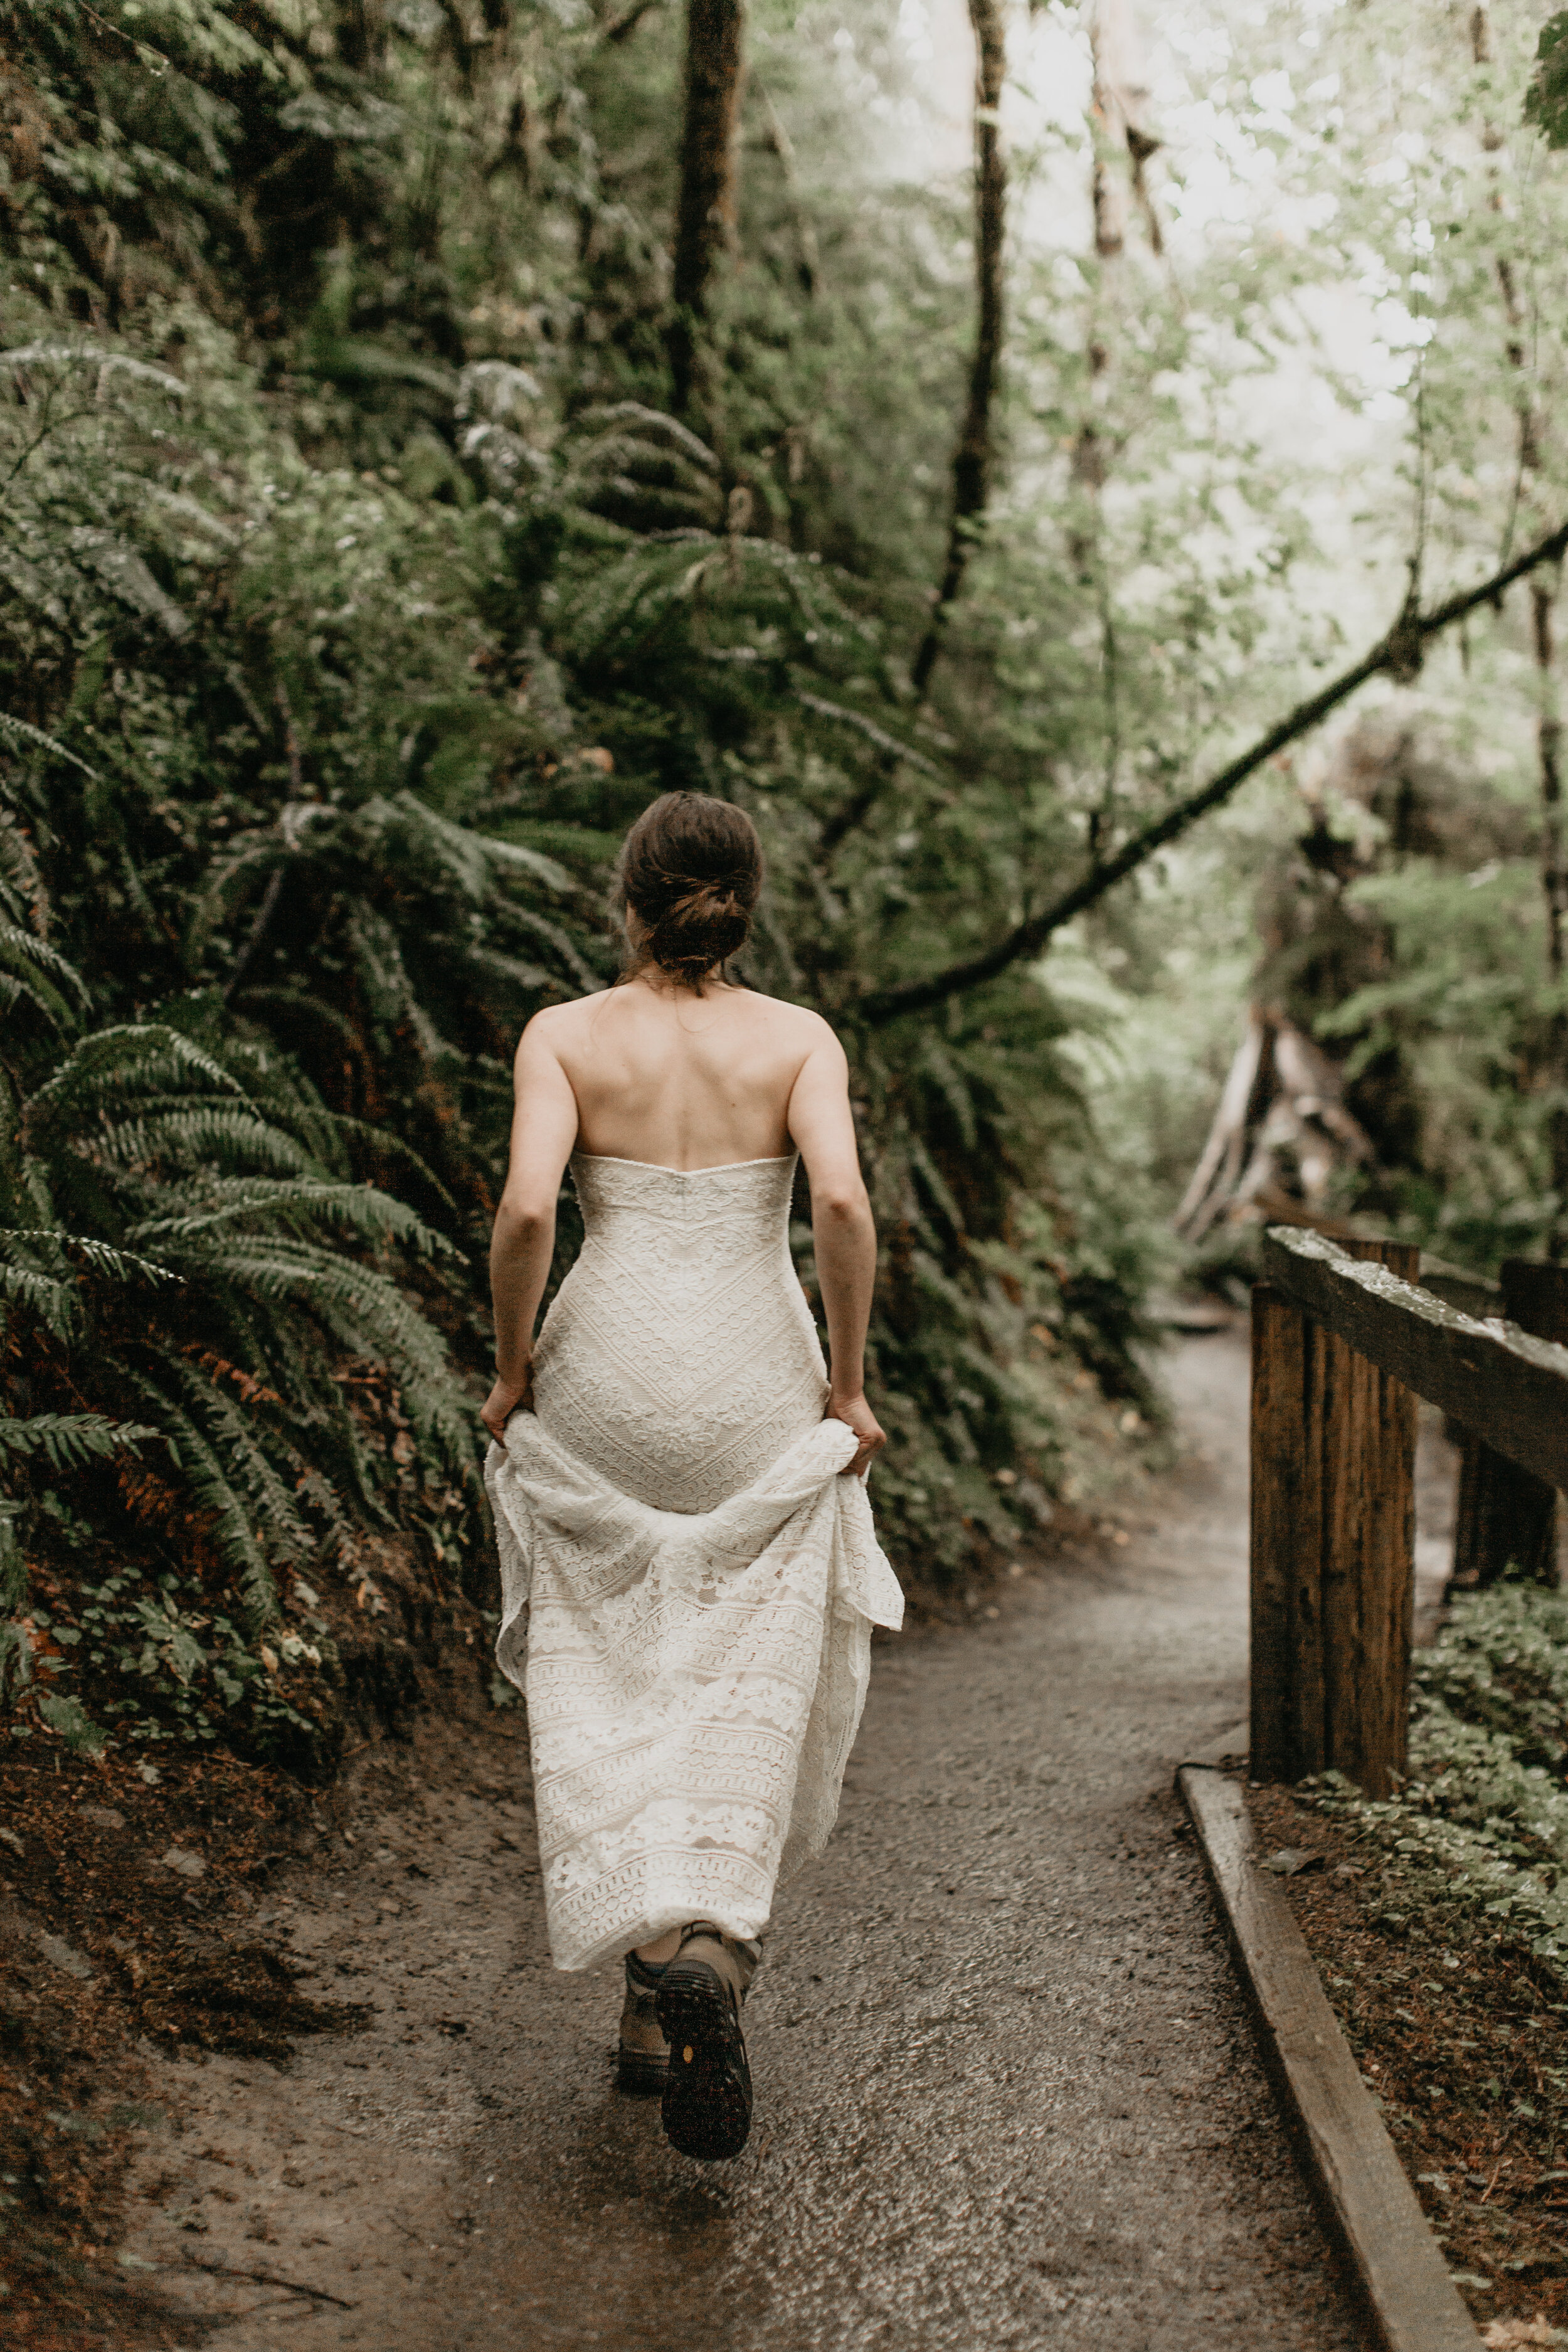 Nicole-Daacke-Photography-Olympic-national-park-elopement-photography-intimiate-elopement-in-olympic-peninsula-washington-state-rainy-day-ruby-beach-hoh-rainforest-elopement-inspiration-rainforest-pnw-elopement-photography-108.jpg